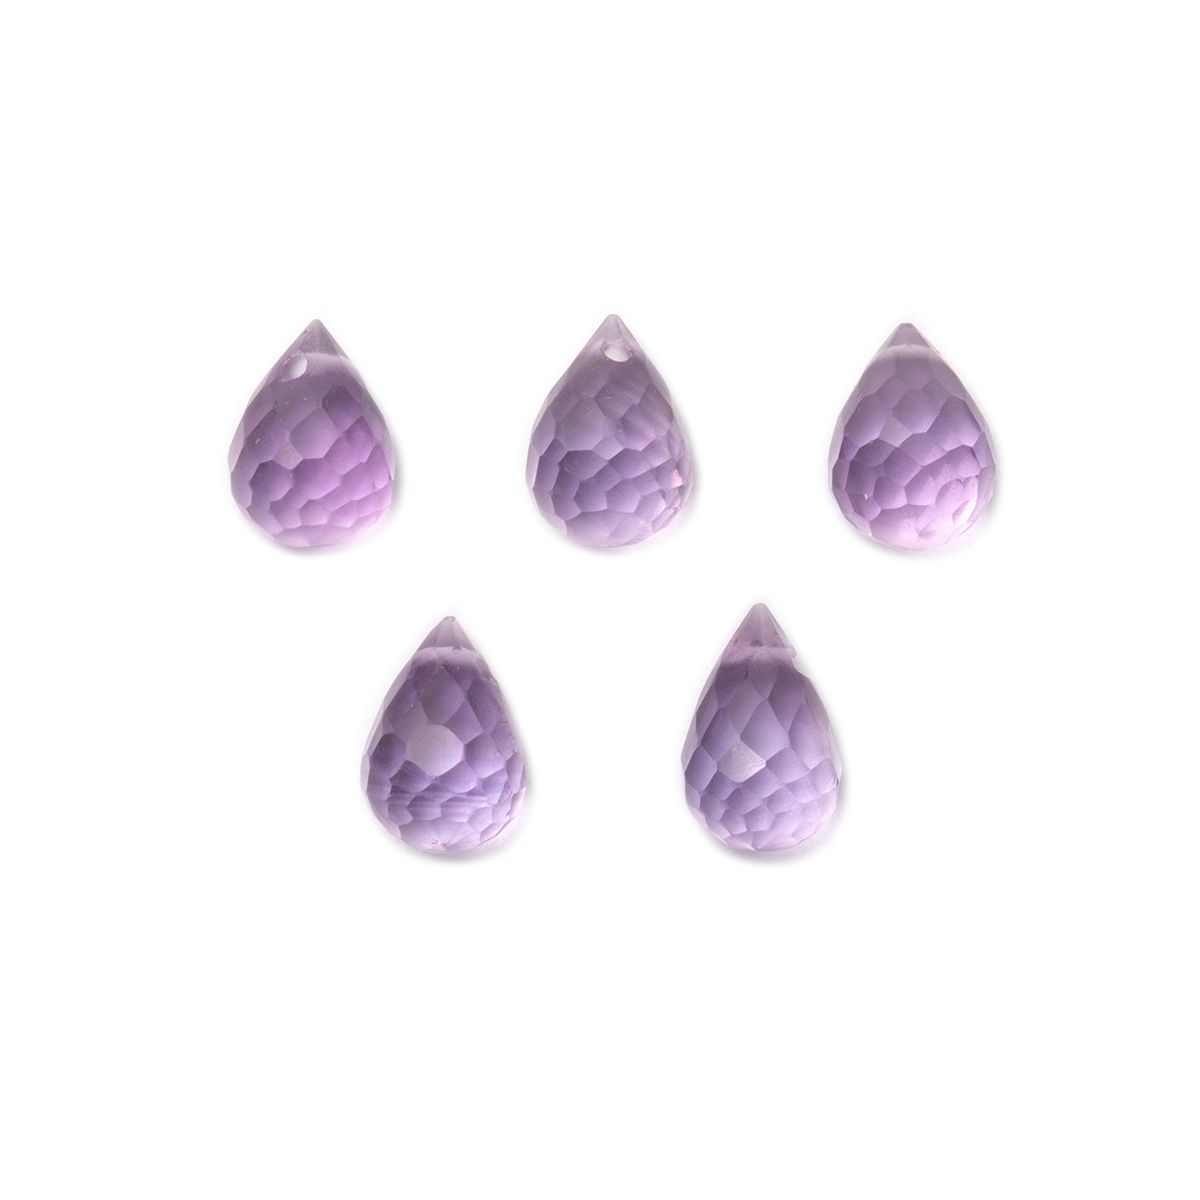 Pink Amethyst Faceted Drop Briolette Beads, Approx From 6x5mm to 9x5mm, Pack Of 10 Beads